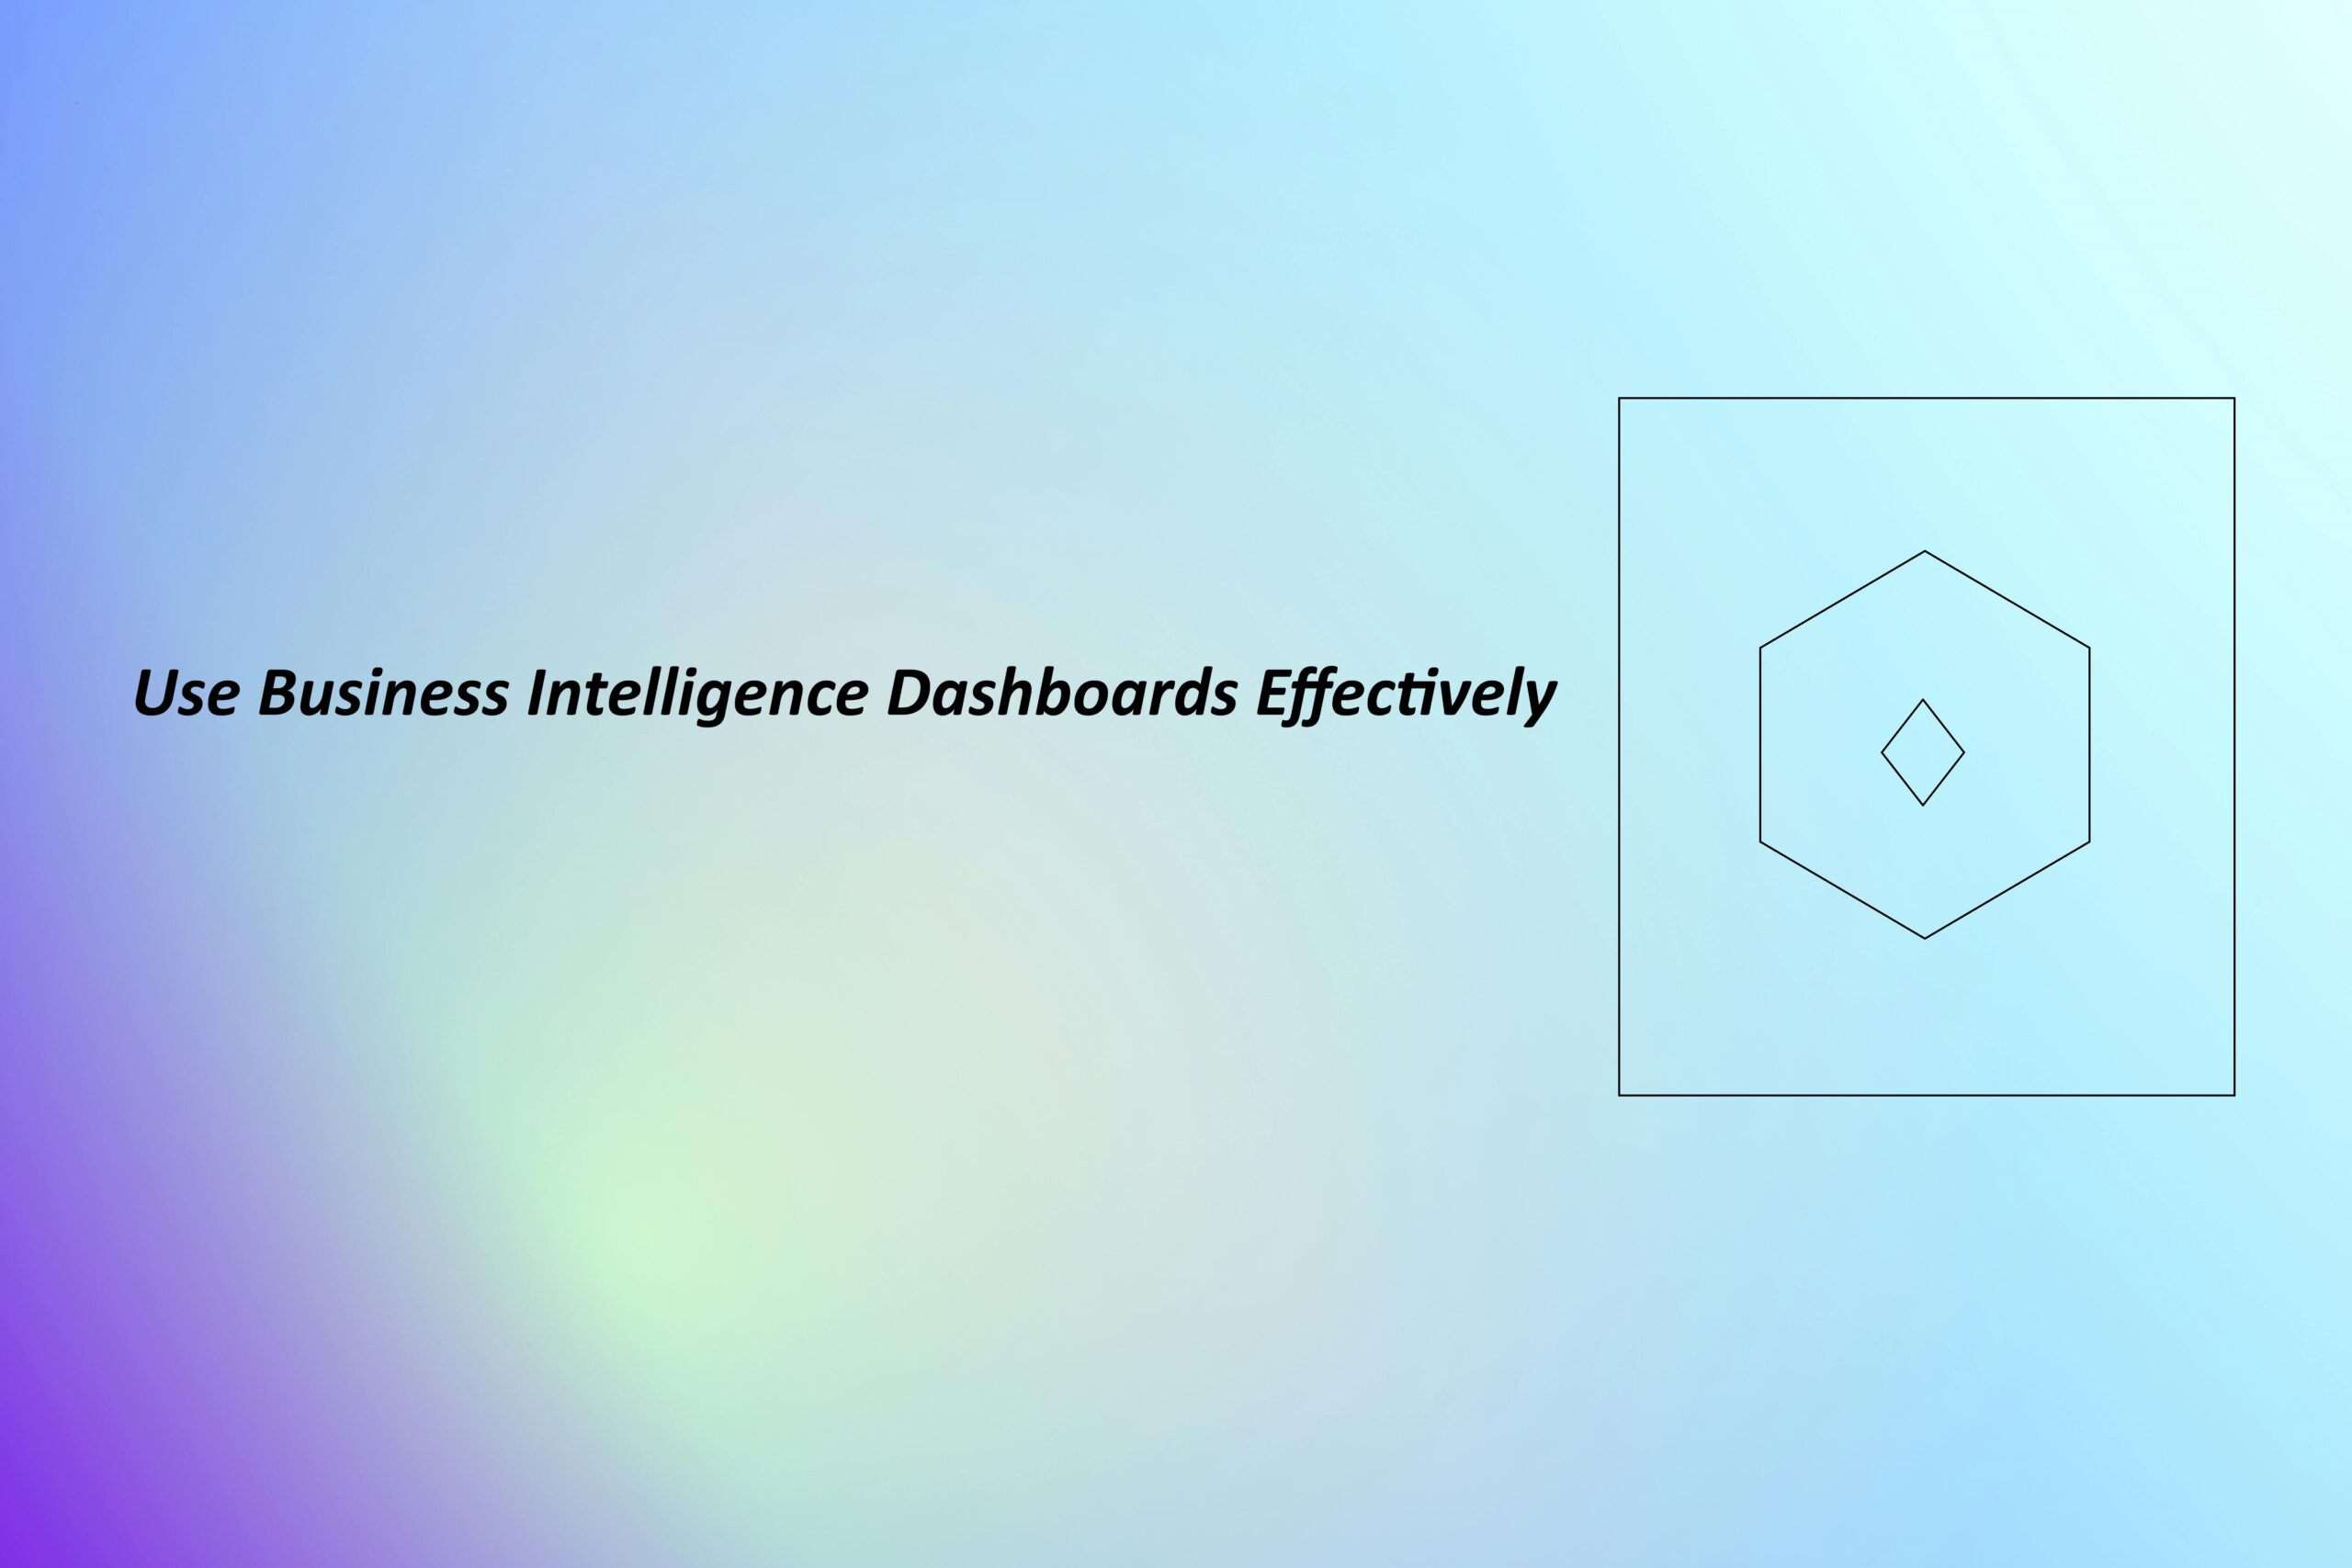 How to Use Business Intelligence Dashboards Effectively